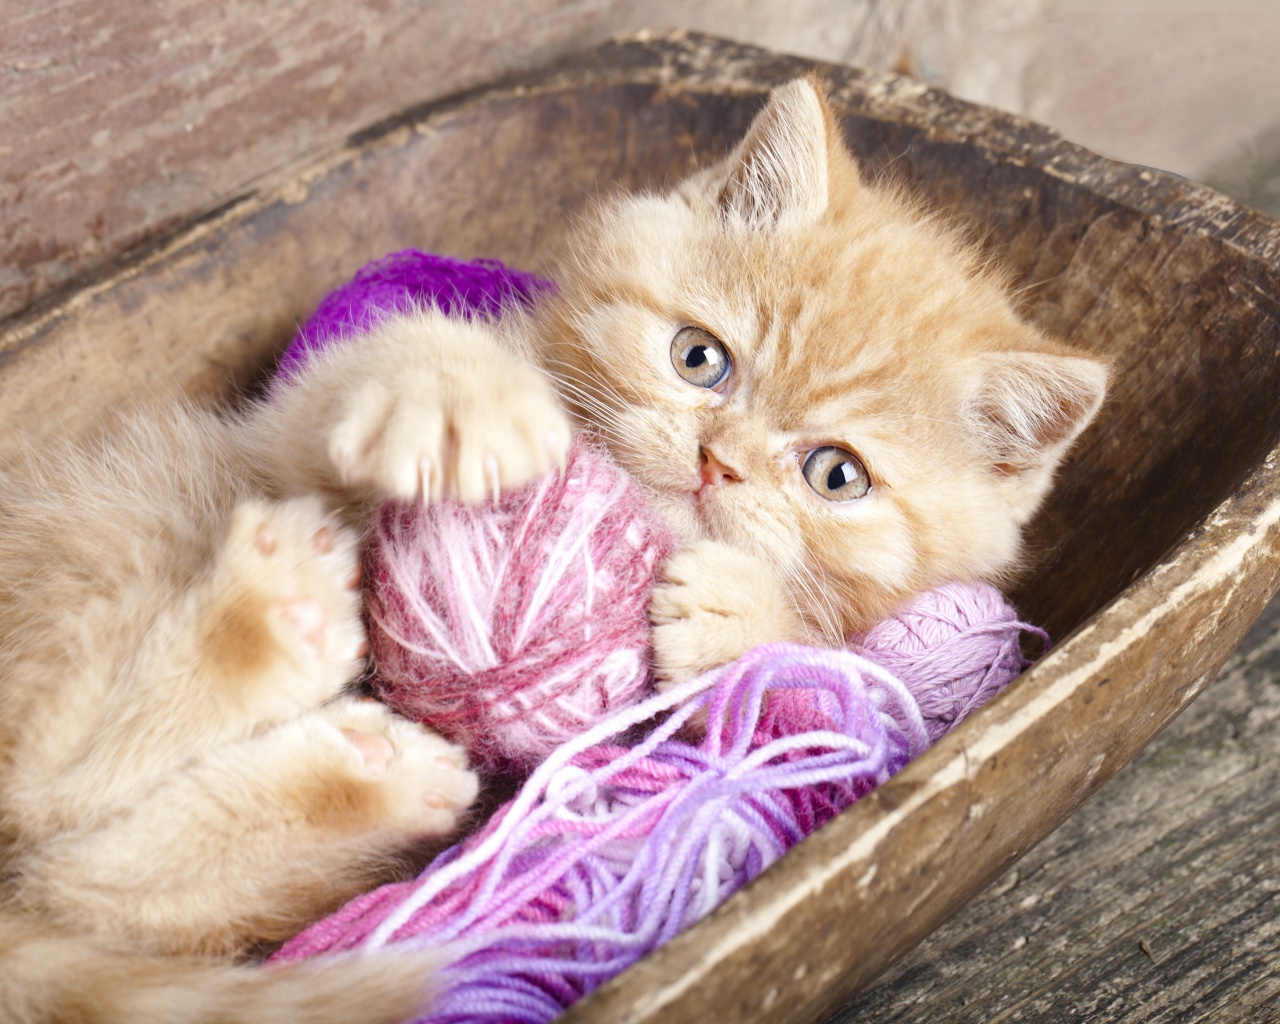 Cute Kitten Playing With A Ball Of Yarn wallpaper 1280x1024